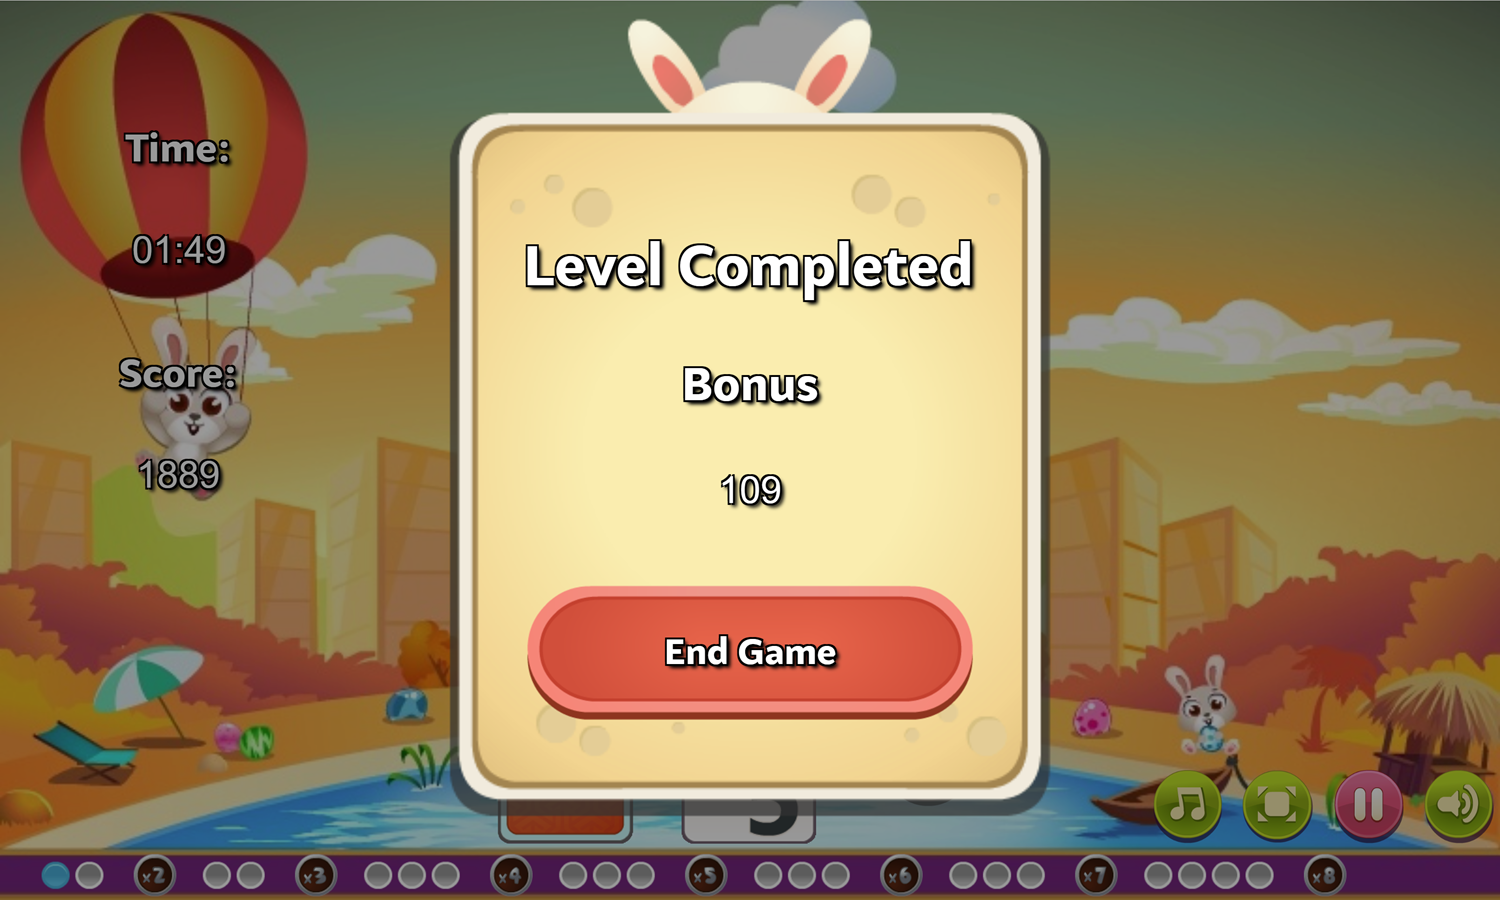 Bunny Solitaire Game Level Completed Screen Screenshot.